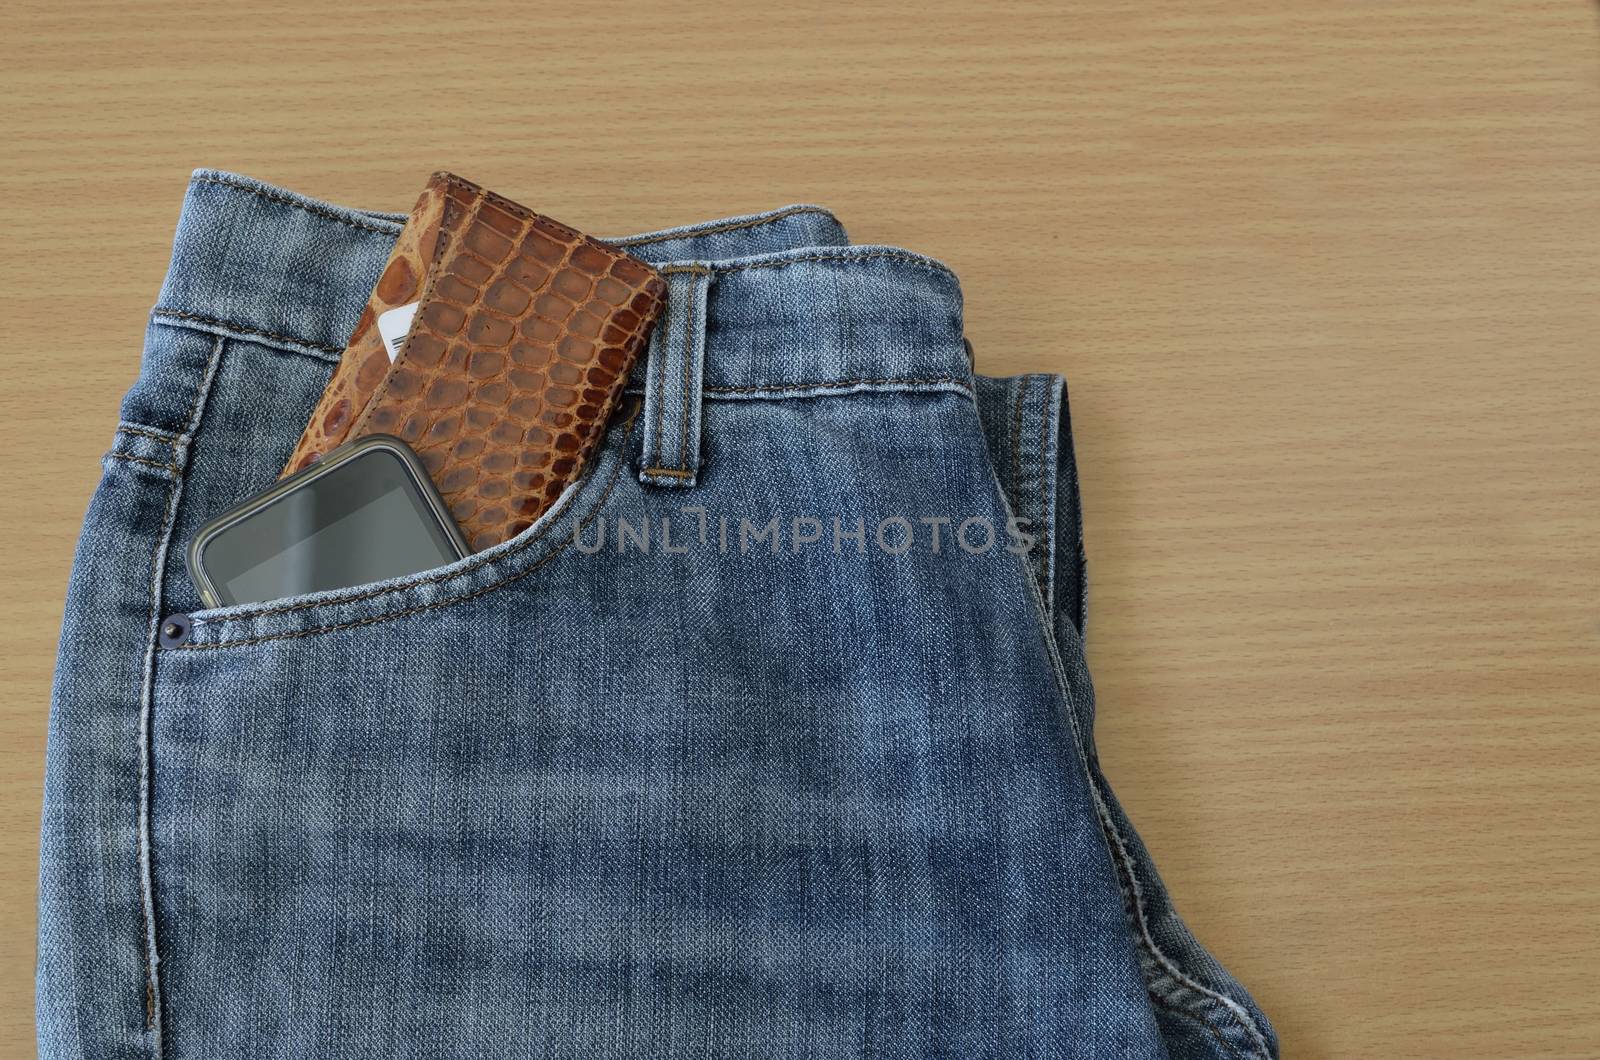 leather wallet and smart phone in jeans pocket on wooden background